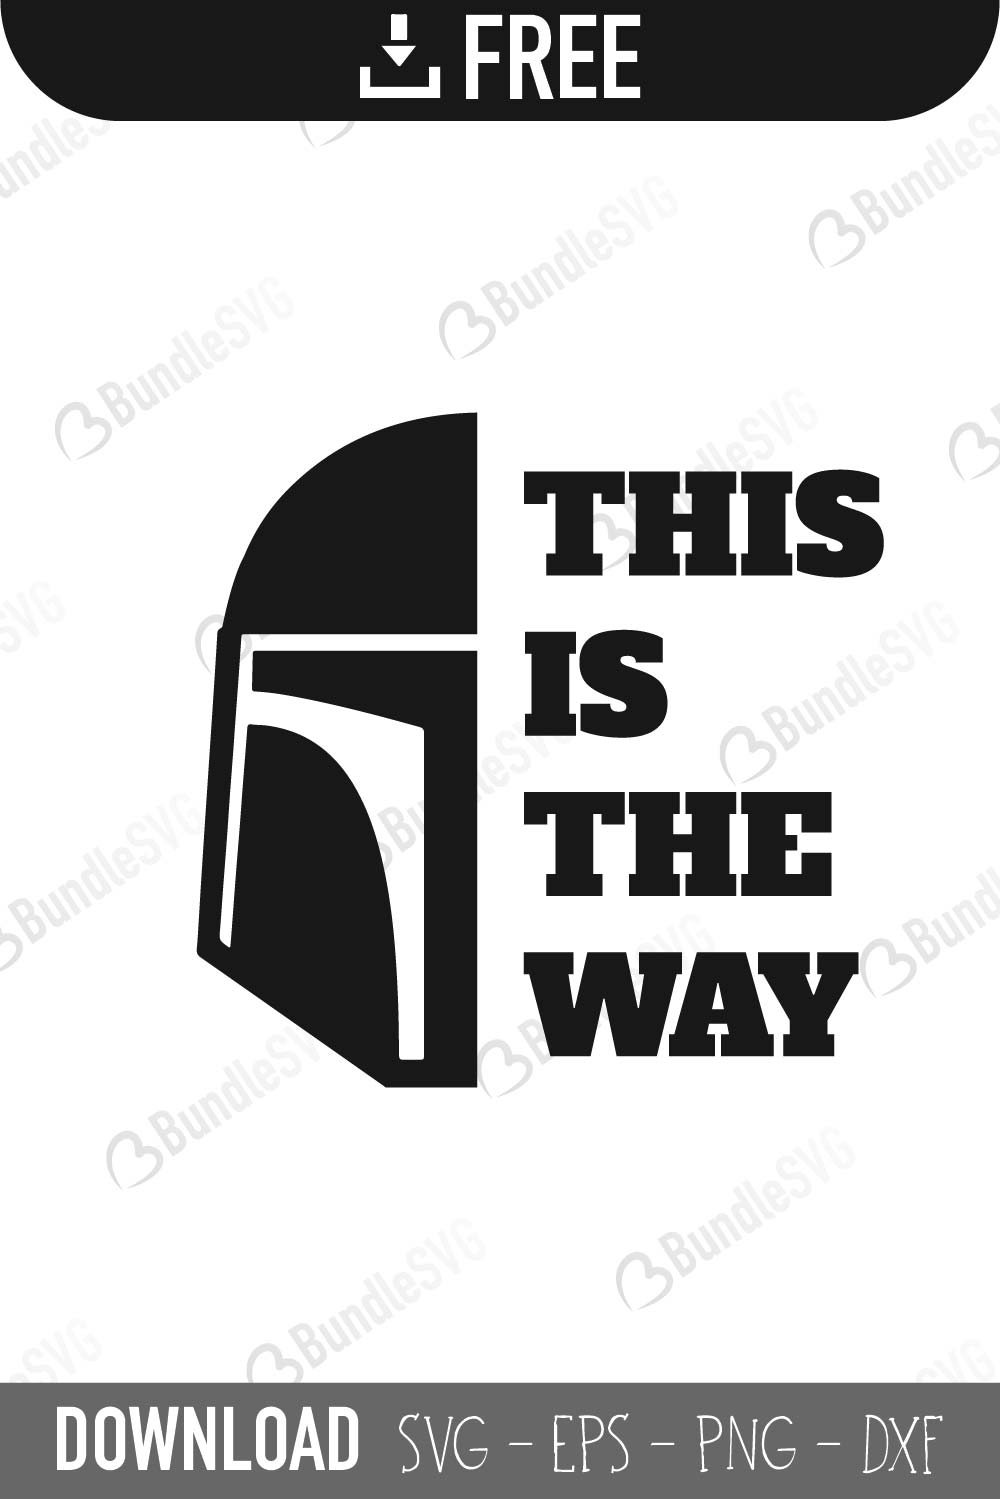 This way that way SVG files